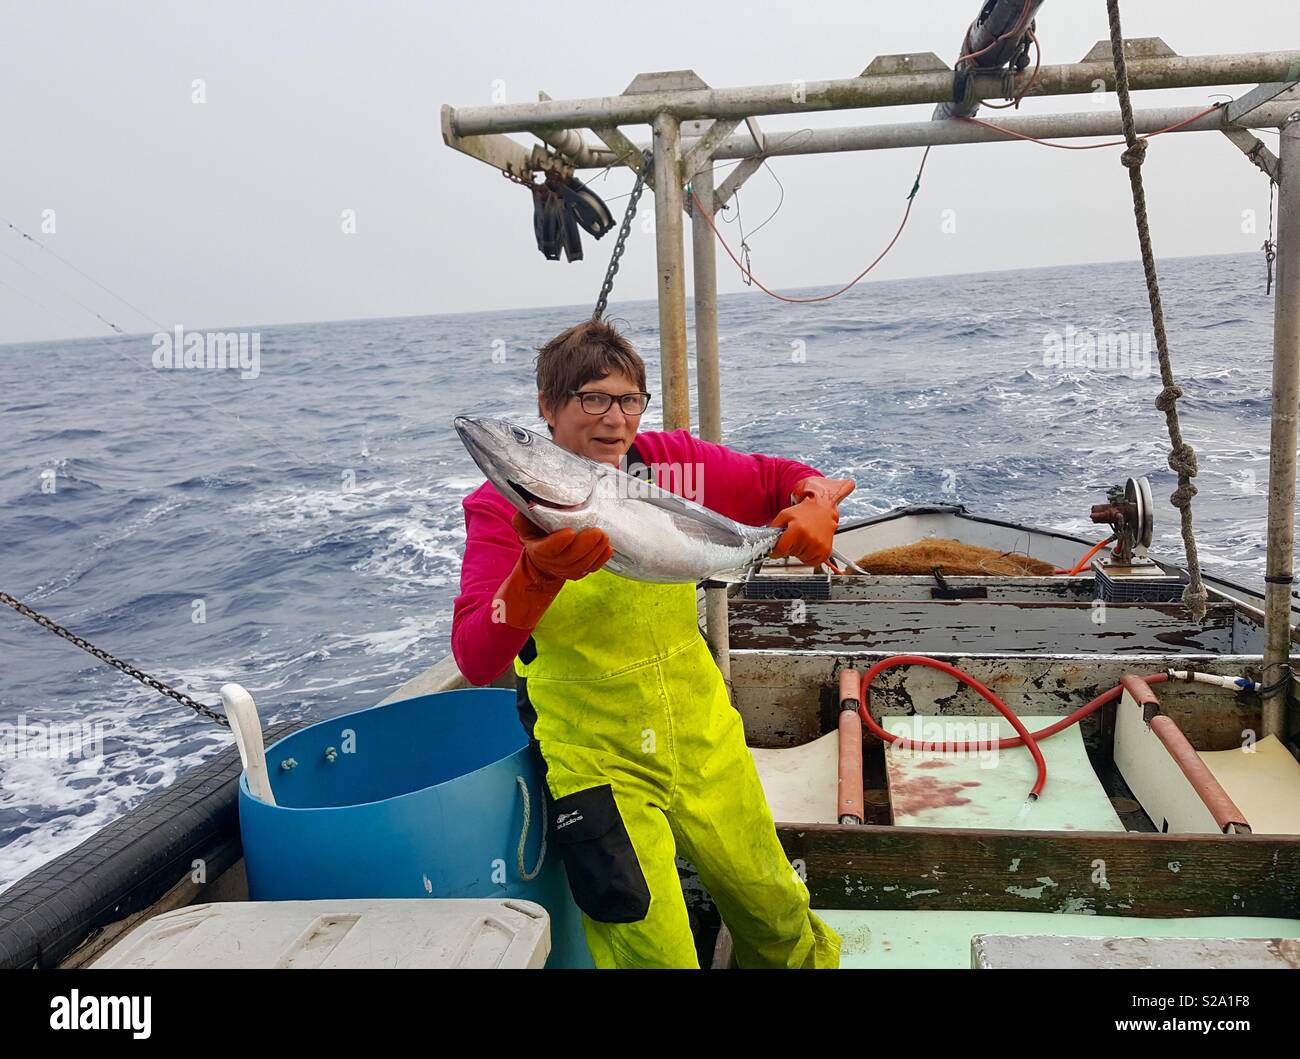 Female commercial fishing deckhand lands an albacore tuna on deck of an historic wooden fishing vessel. Stock Photo